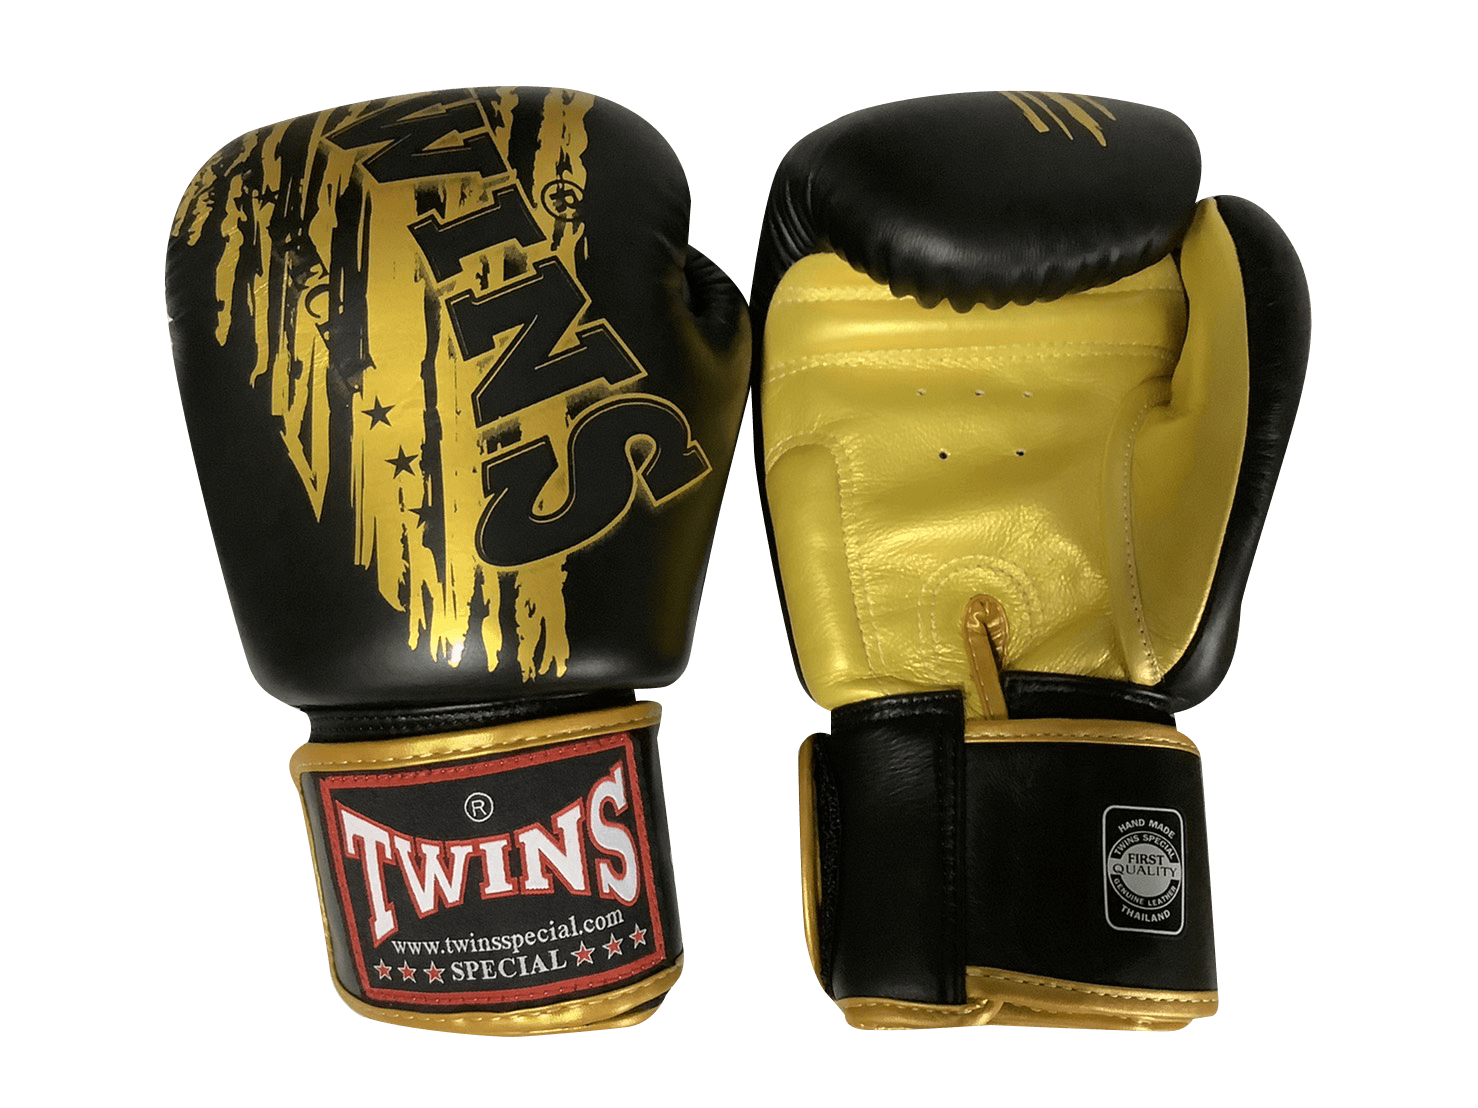 Twins Special BOXING GLOVES FBGVL3-TW3 BLACK/GOLD